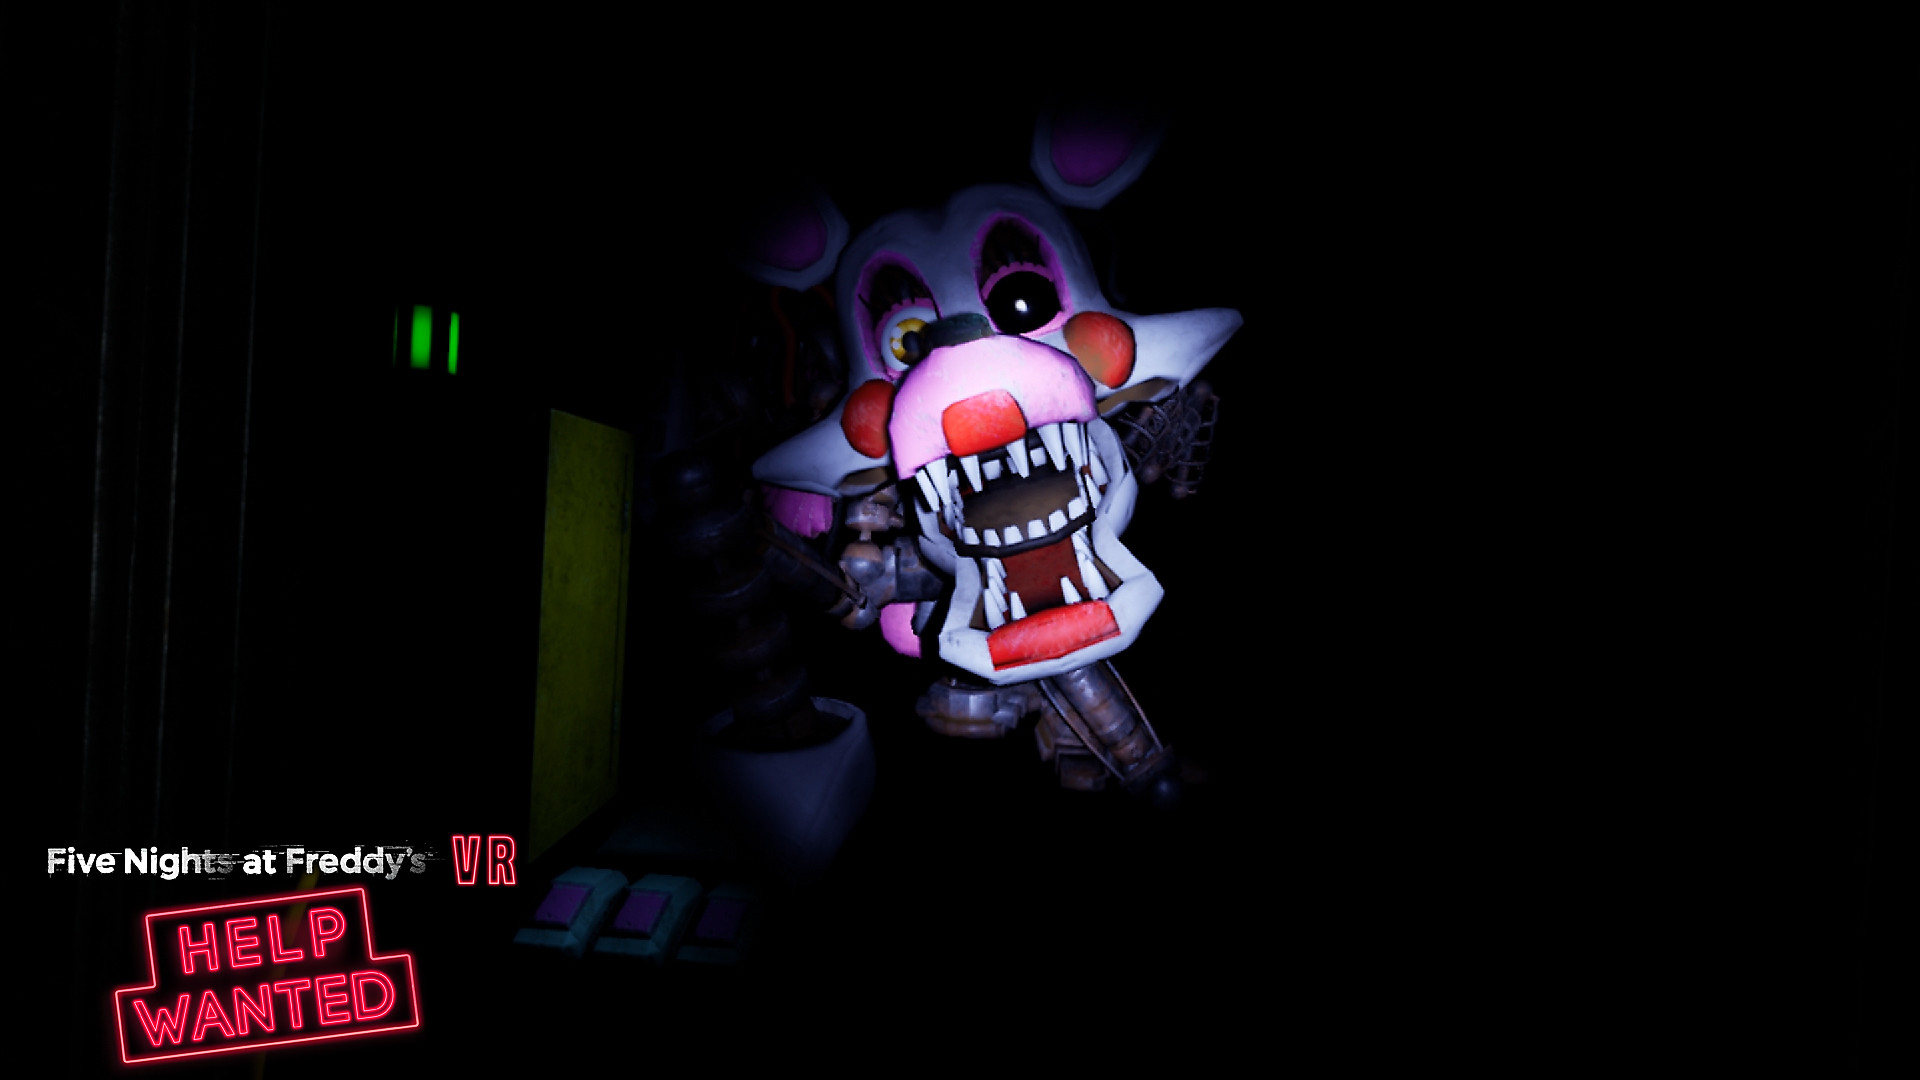 five nights at freddy's wallpaper,darkness,graphic design,fictional character,magenta,font